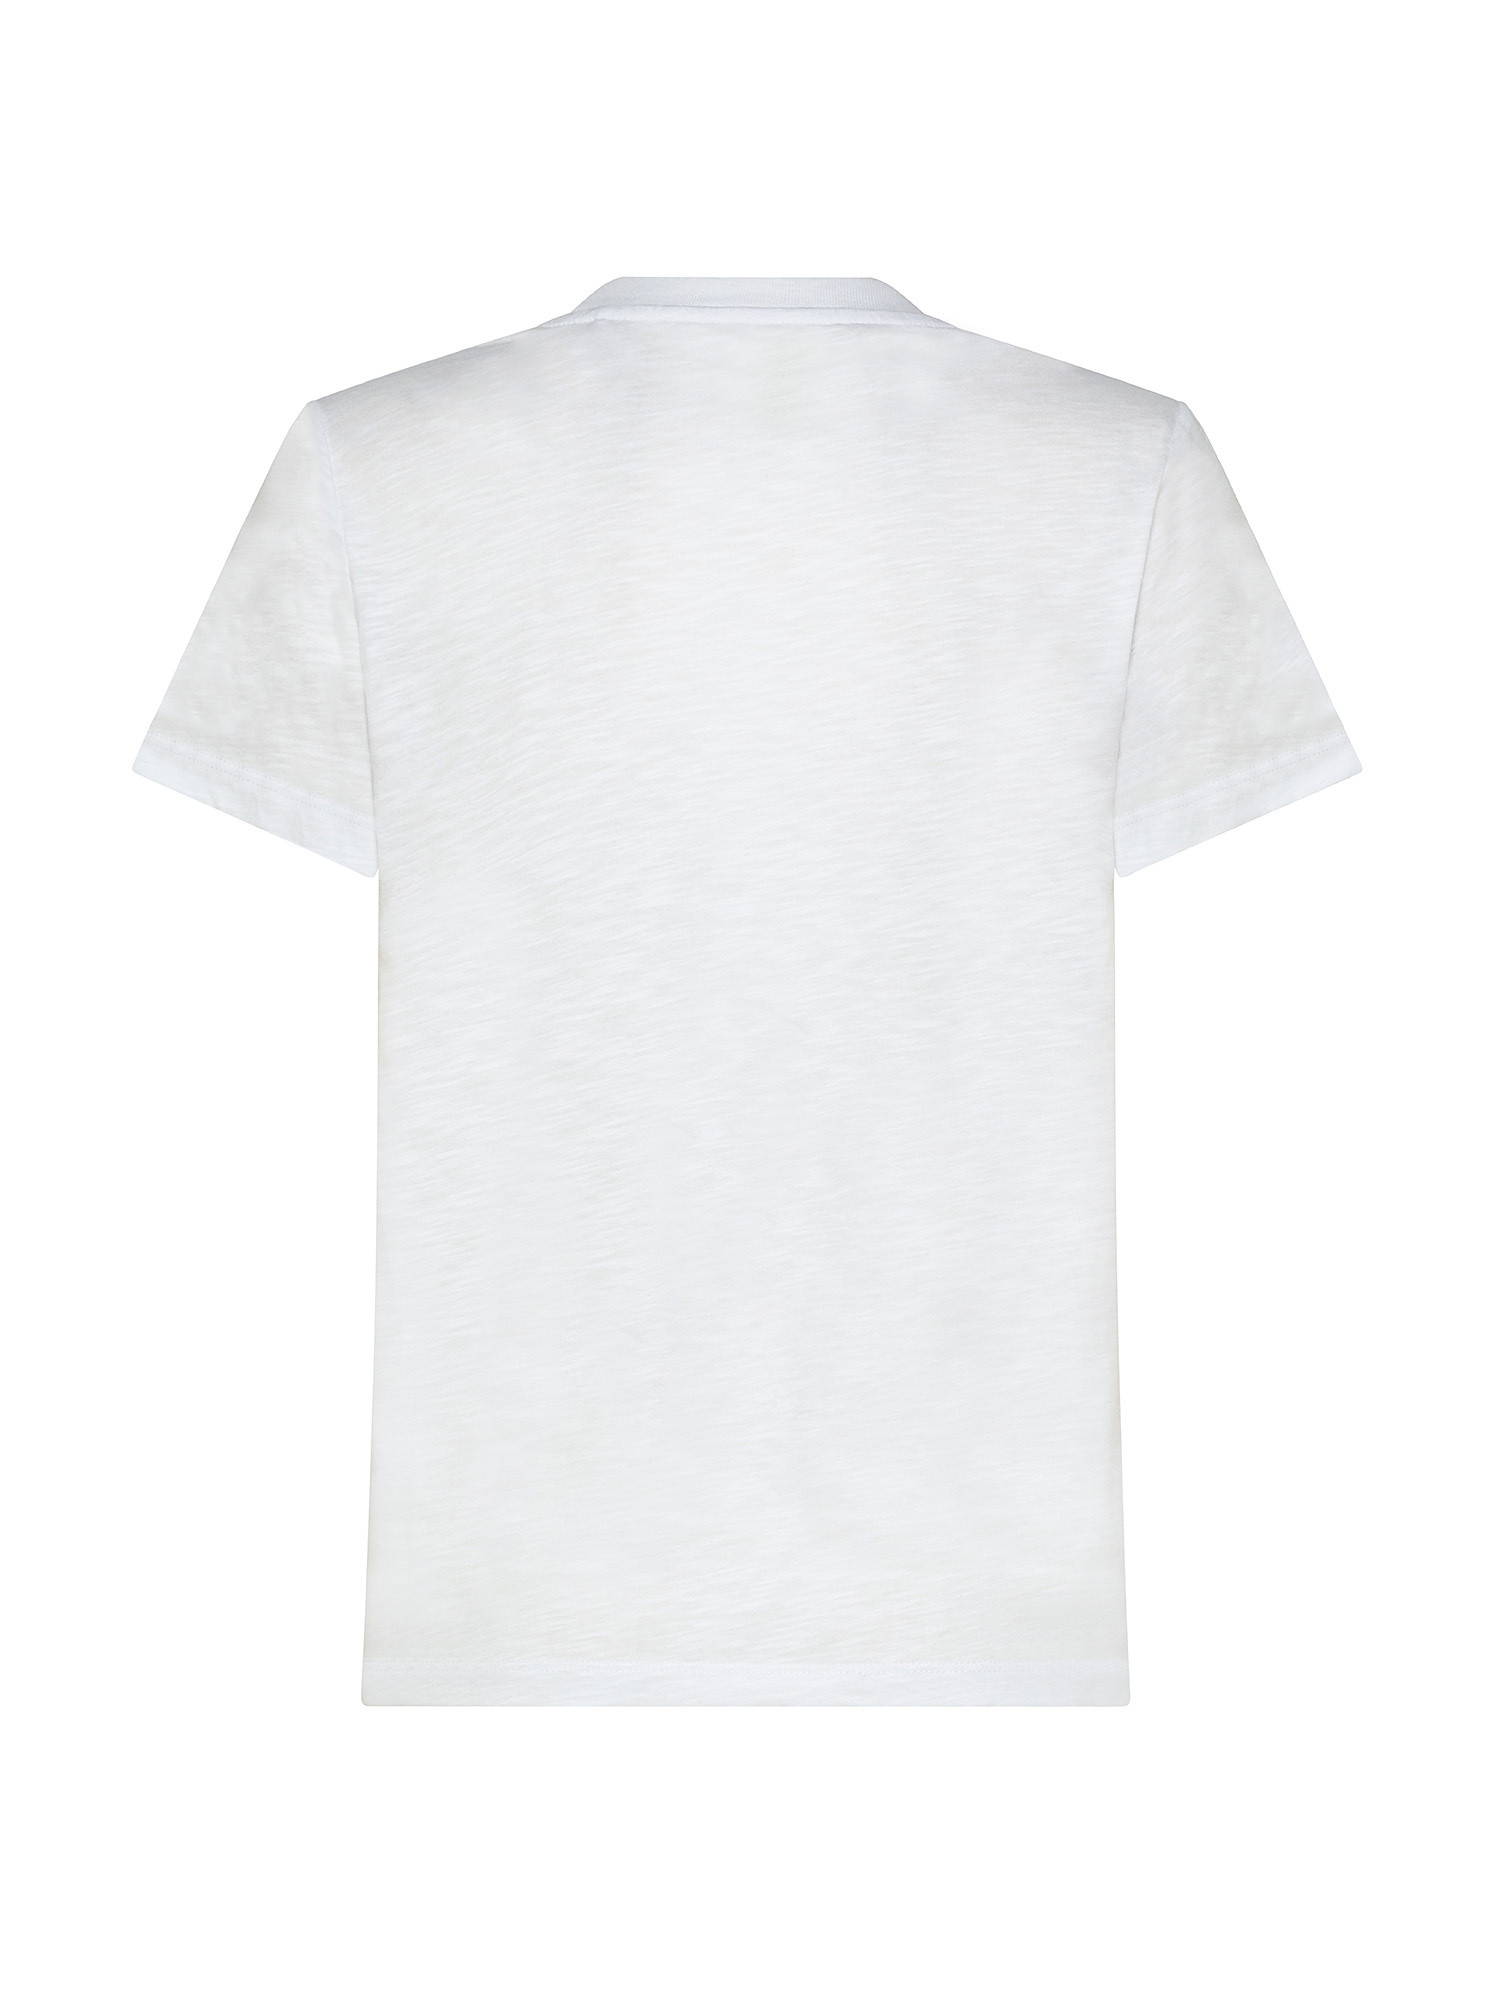 Rosemery T-shirt with logo print, White, large image number 1